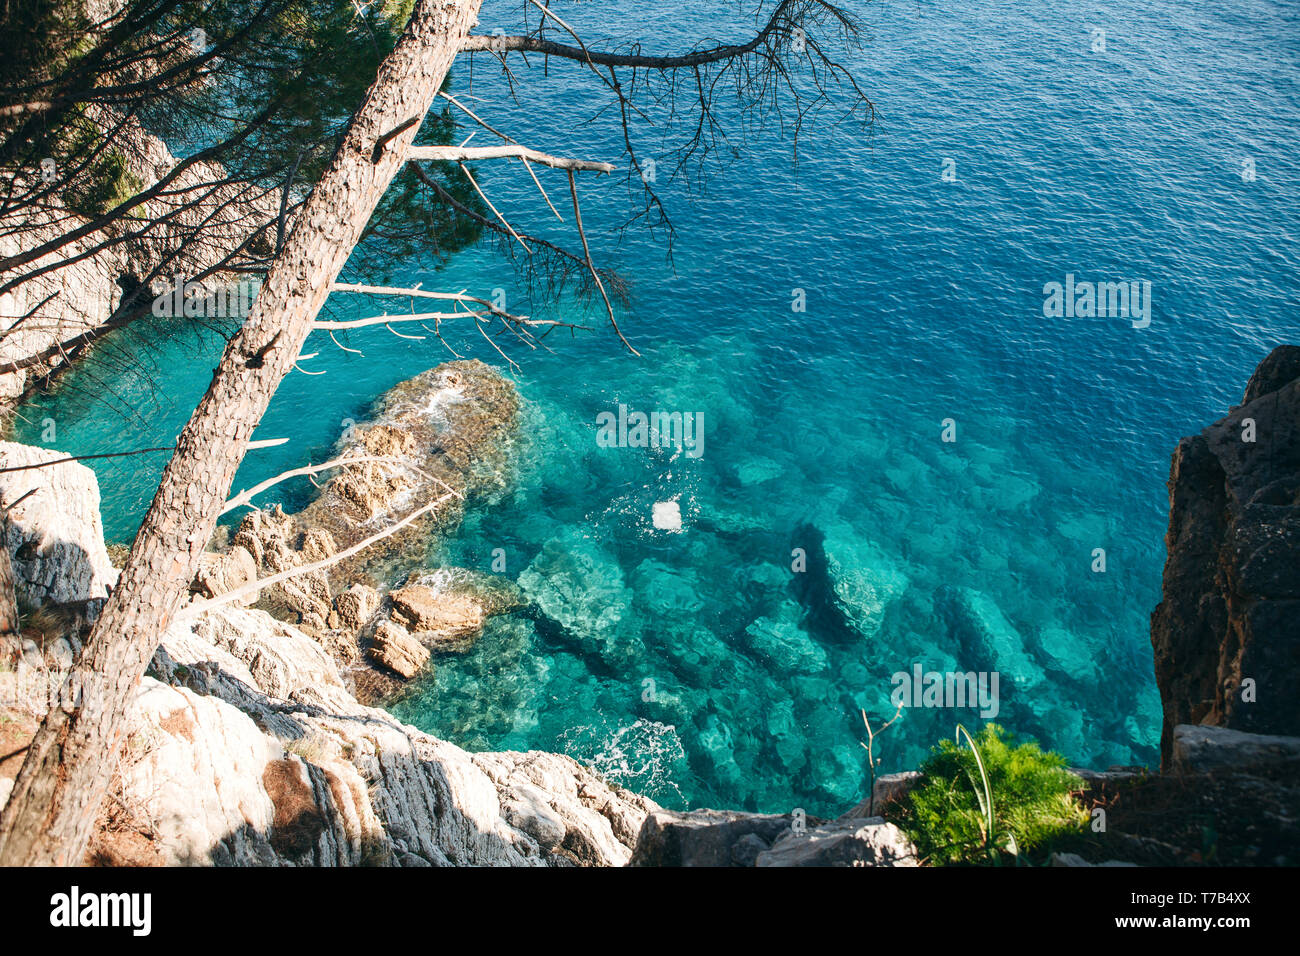 Beautiful natural landscape with trees and sea. Stock Photo